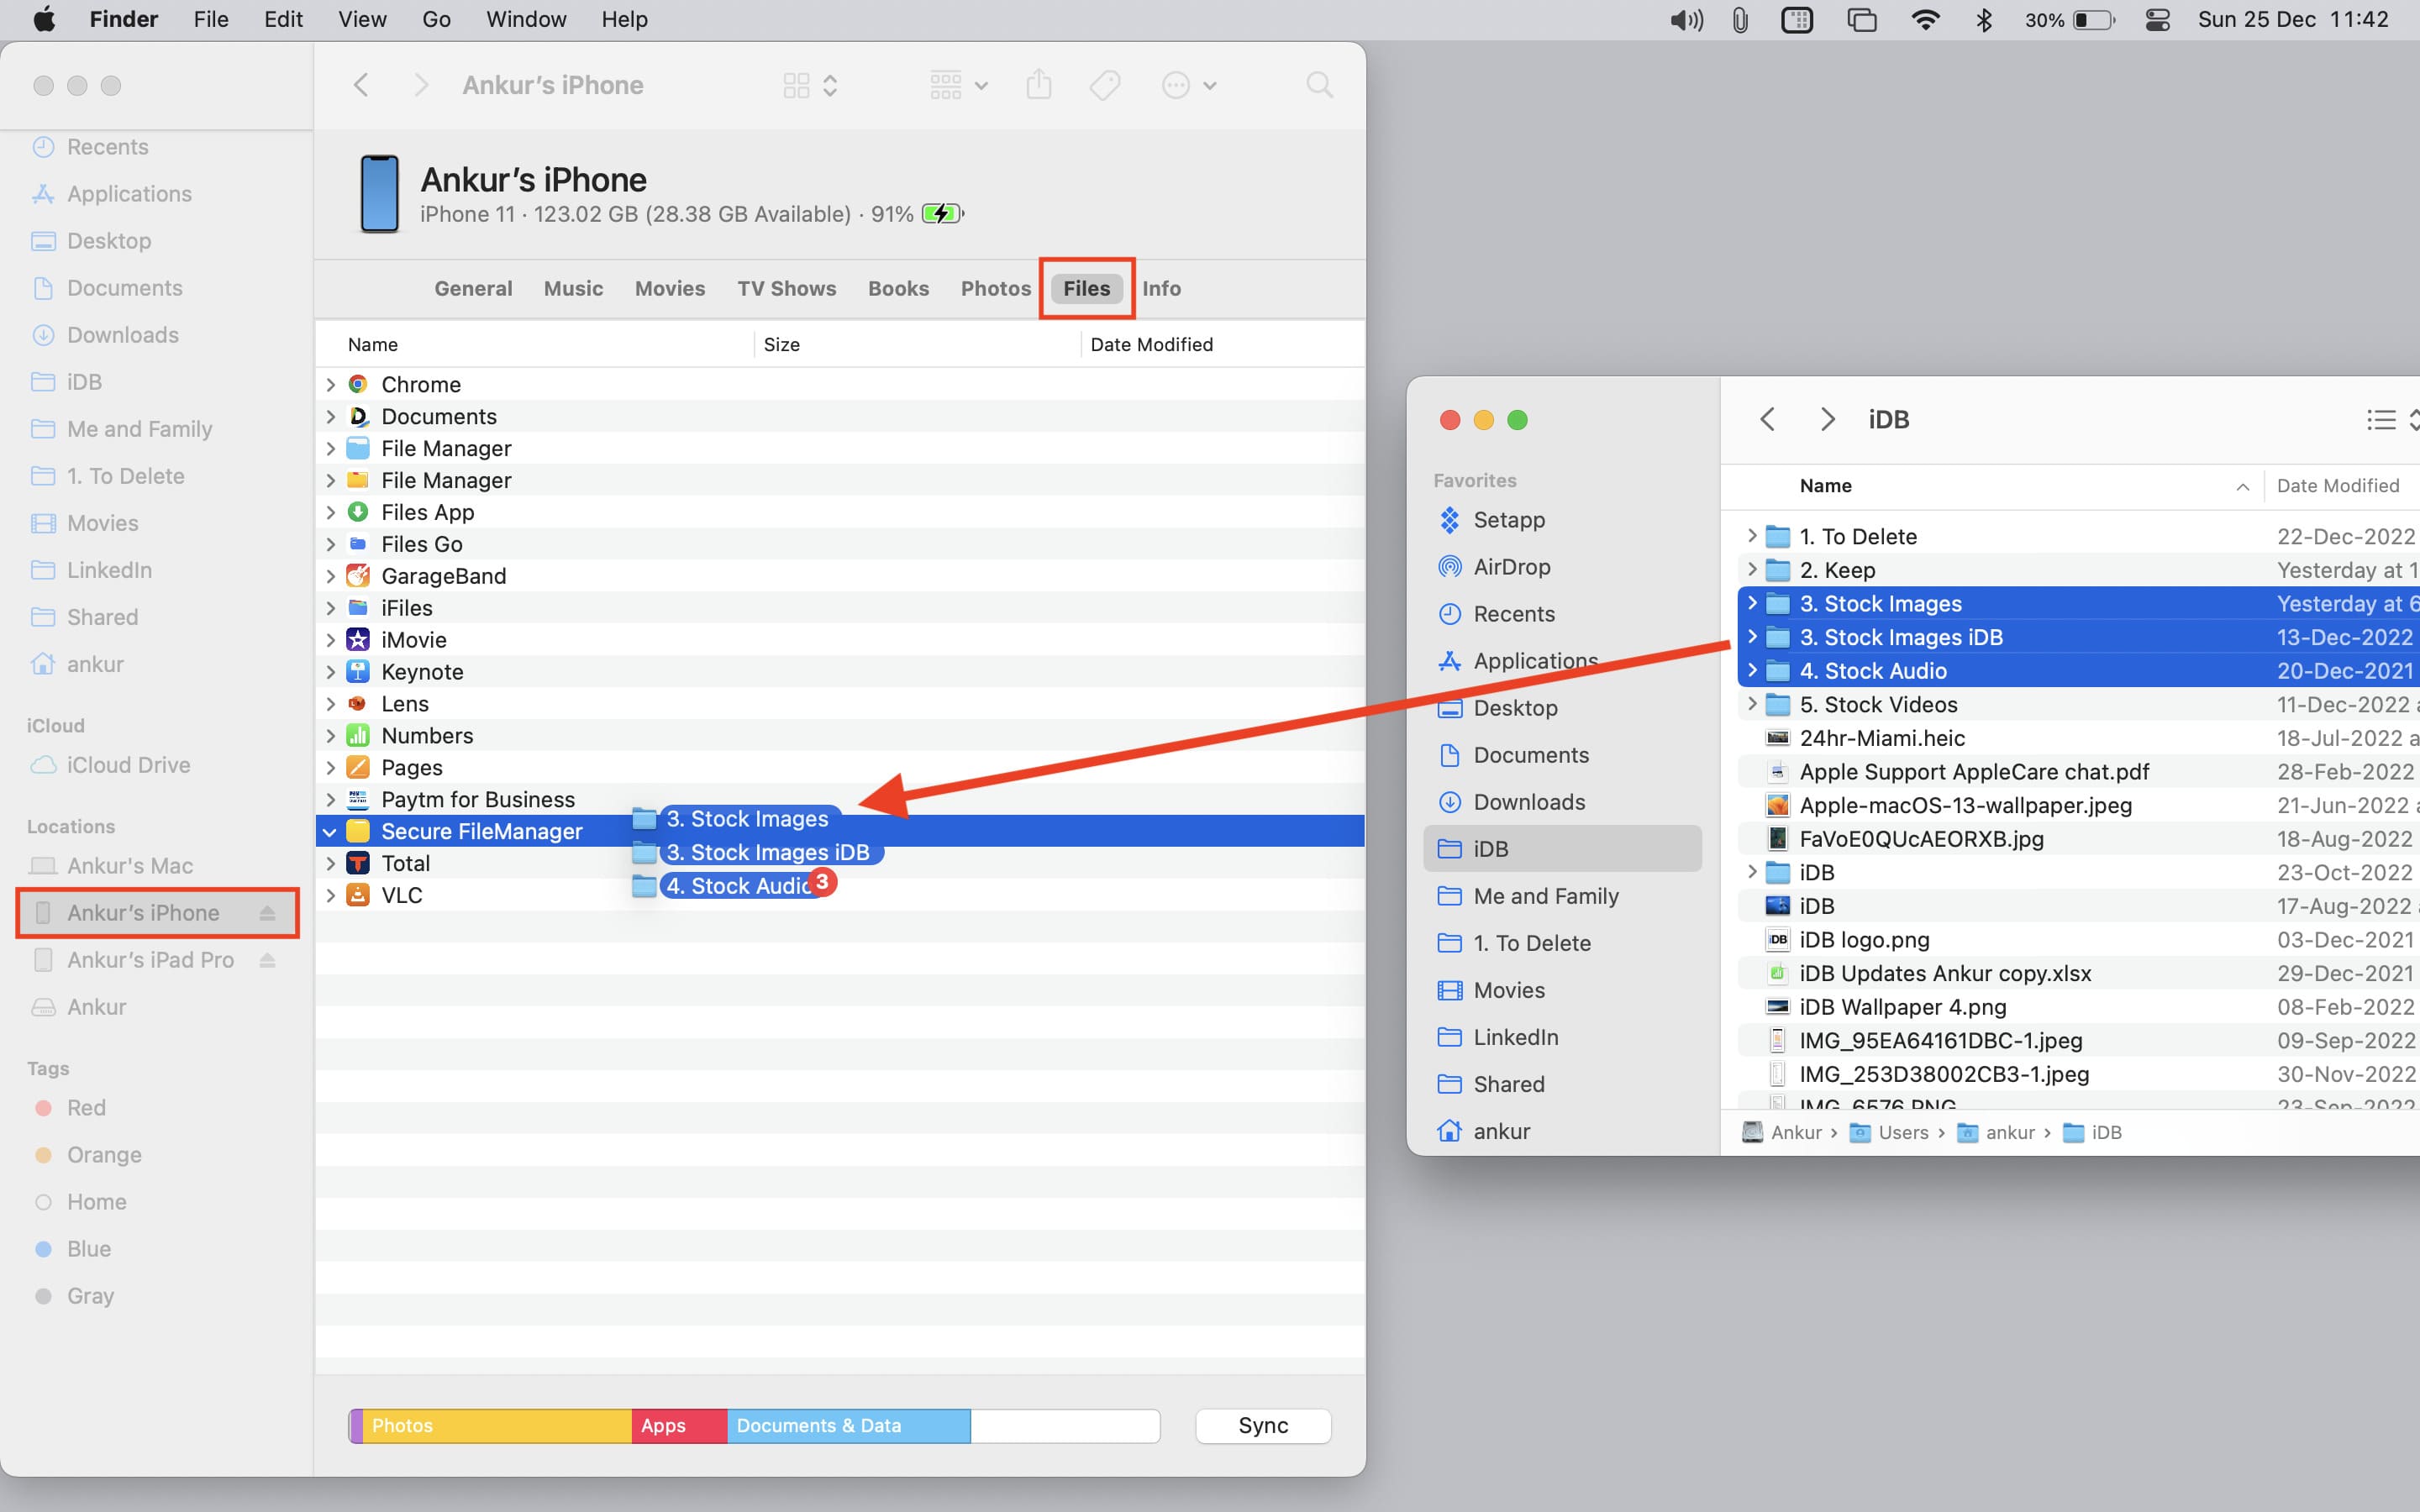 Copy folders from Mac to iPhone using Finder